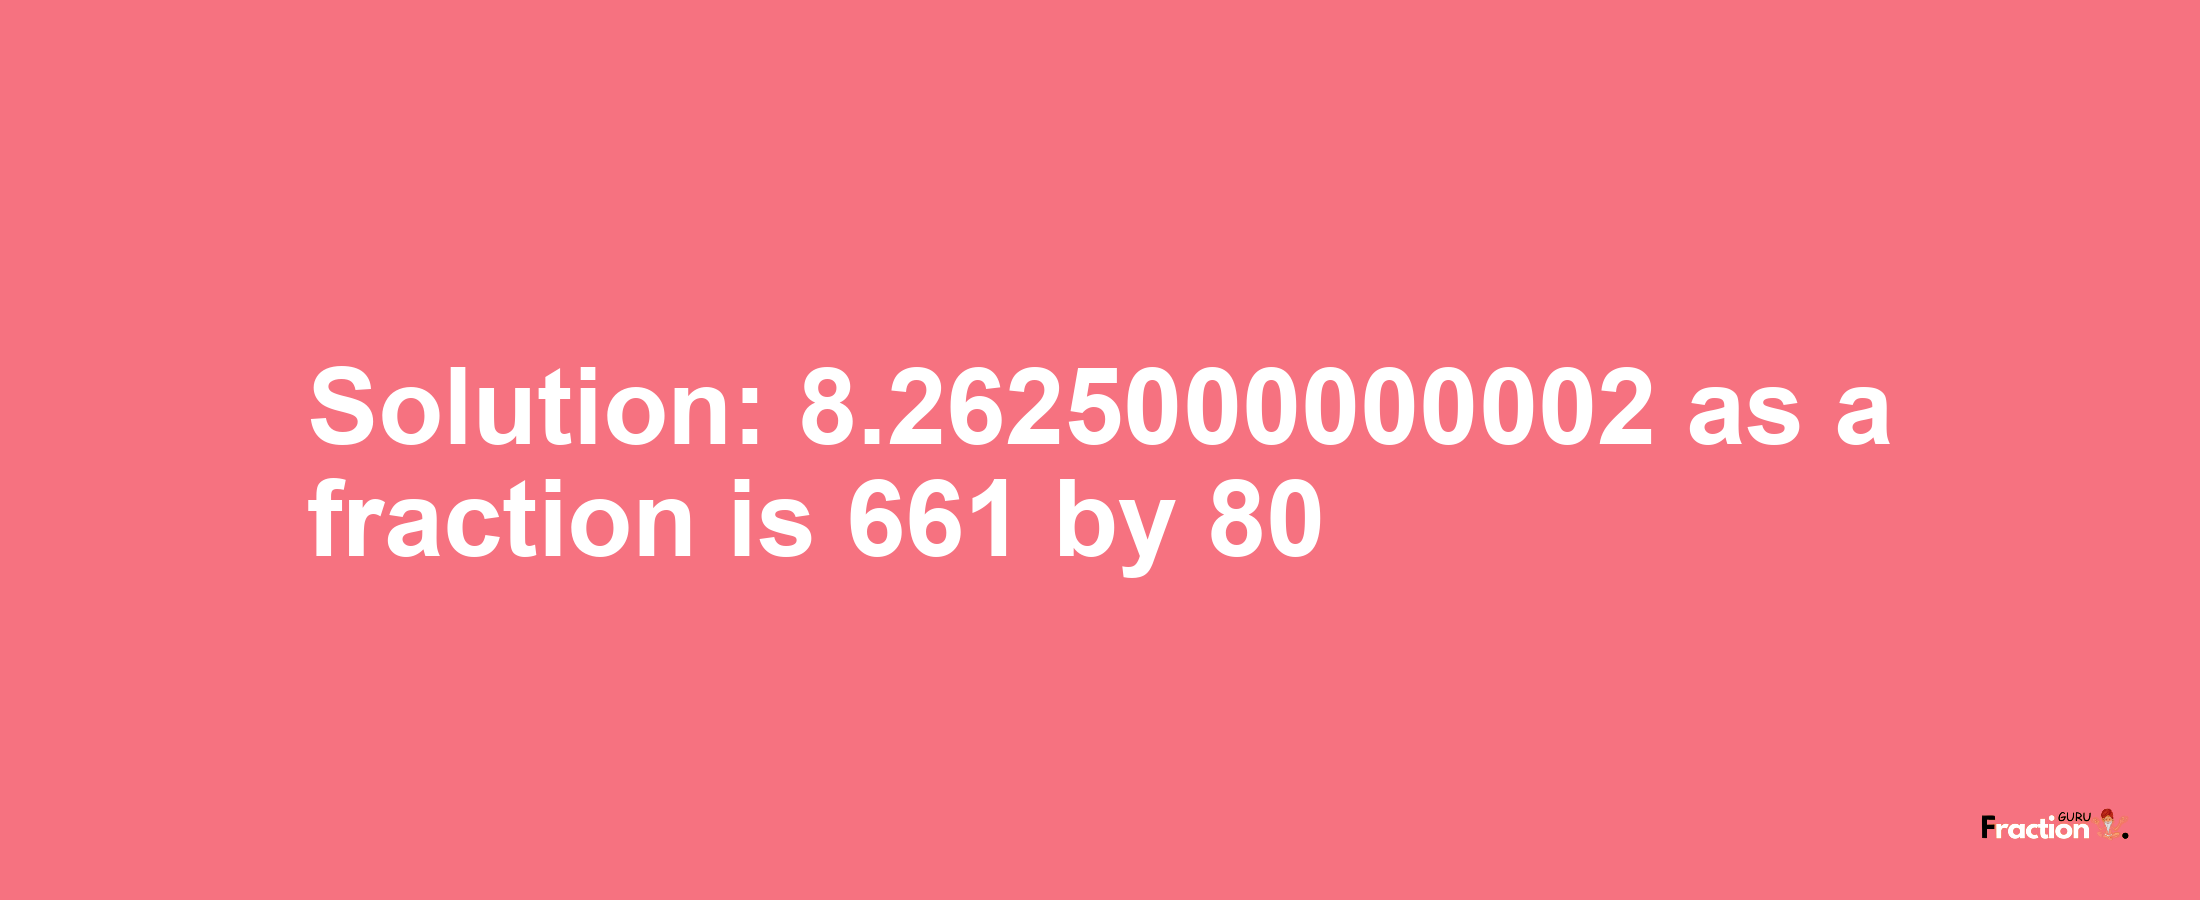 Solution:8.2625000000002 as a fraction is 661/80